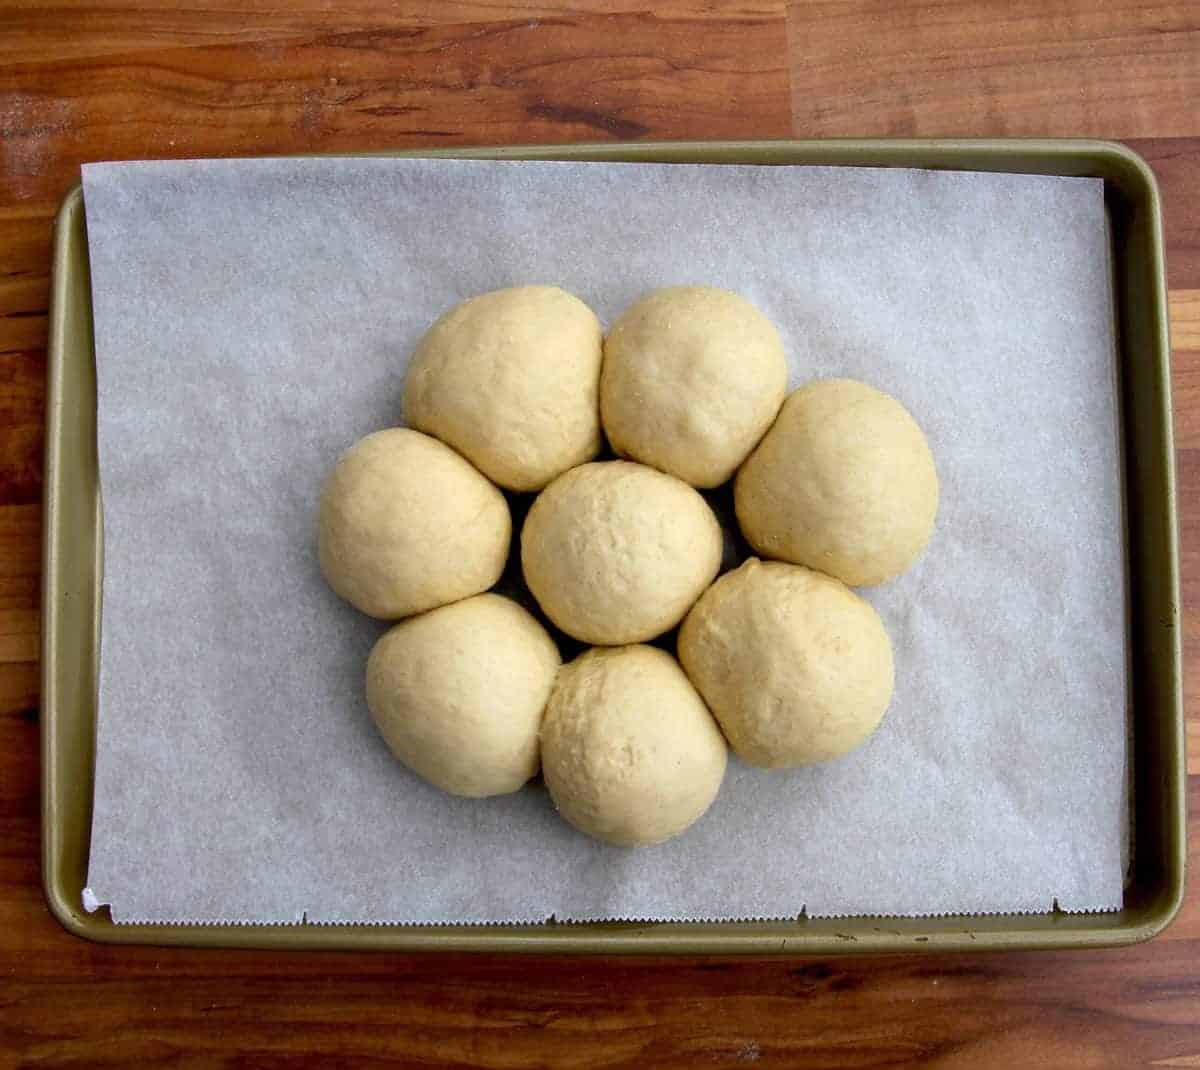 The balls attached together on a tray.